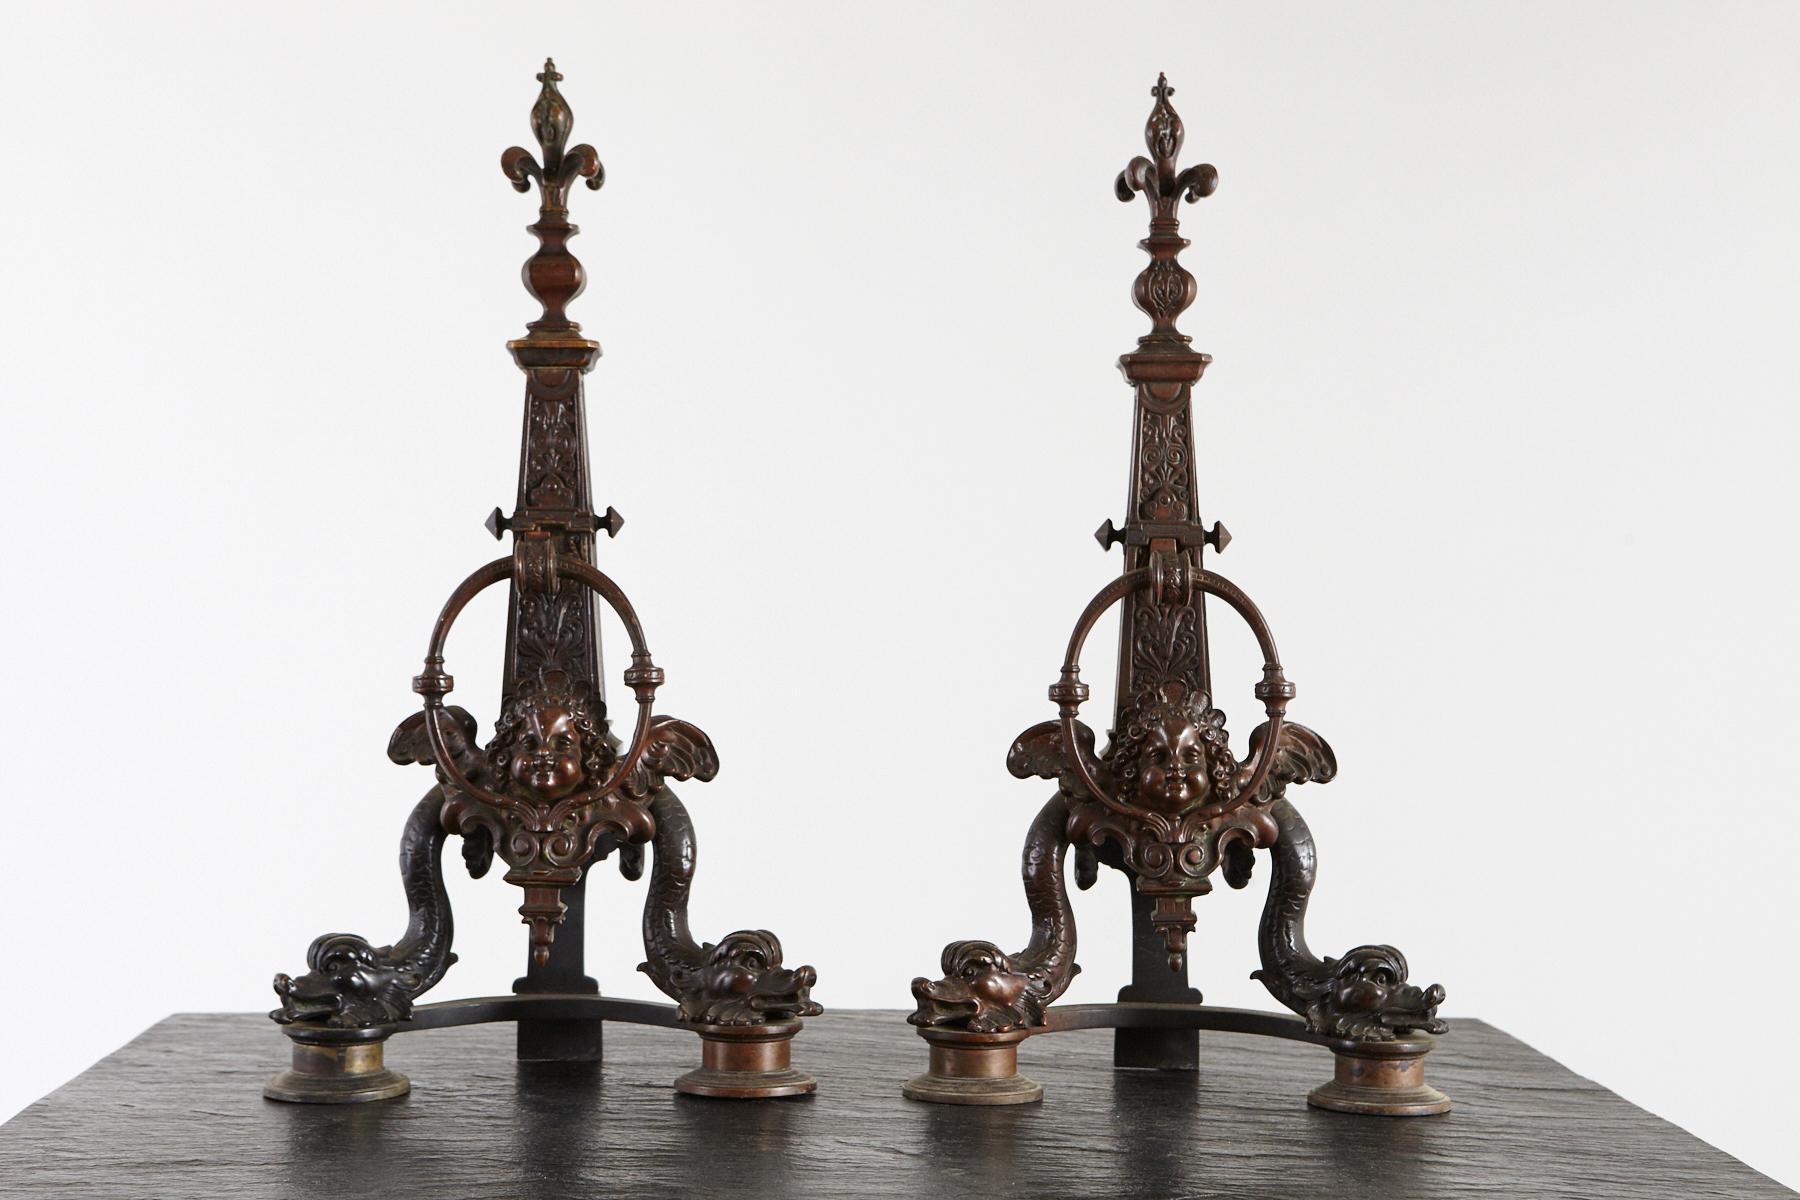 Impressive and beautifully detailed pair of French late 19th century bronze chenets or andirons depicting dolphins and putties. A pair of Fleur-de-Lys topping the obelisks.
The pair of andirons are in very good condition.